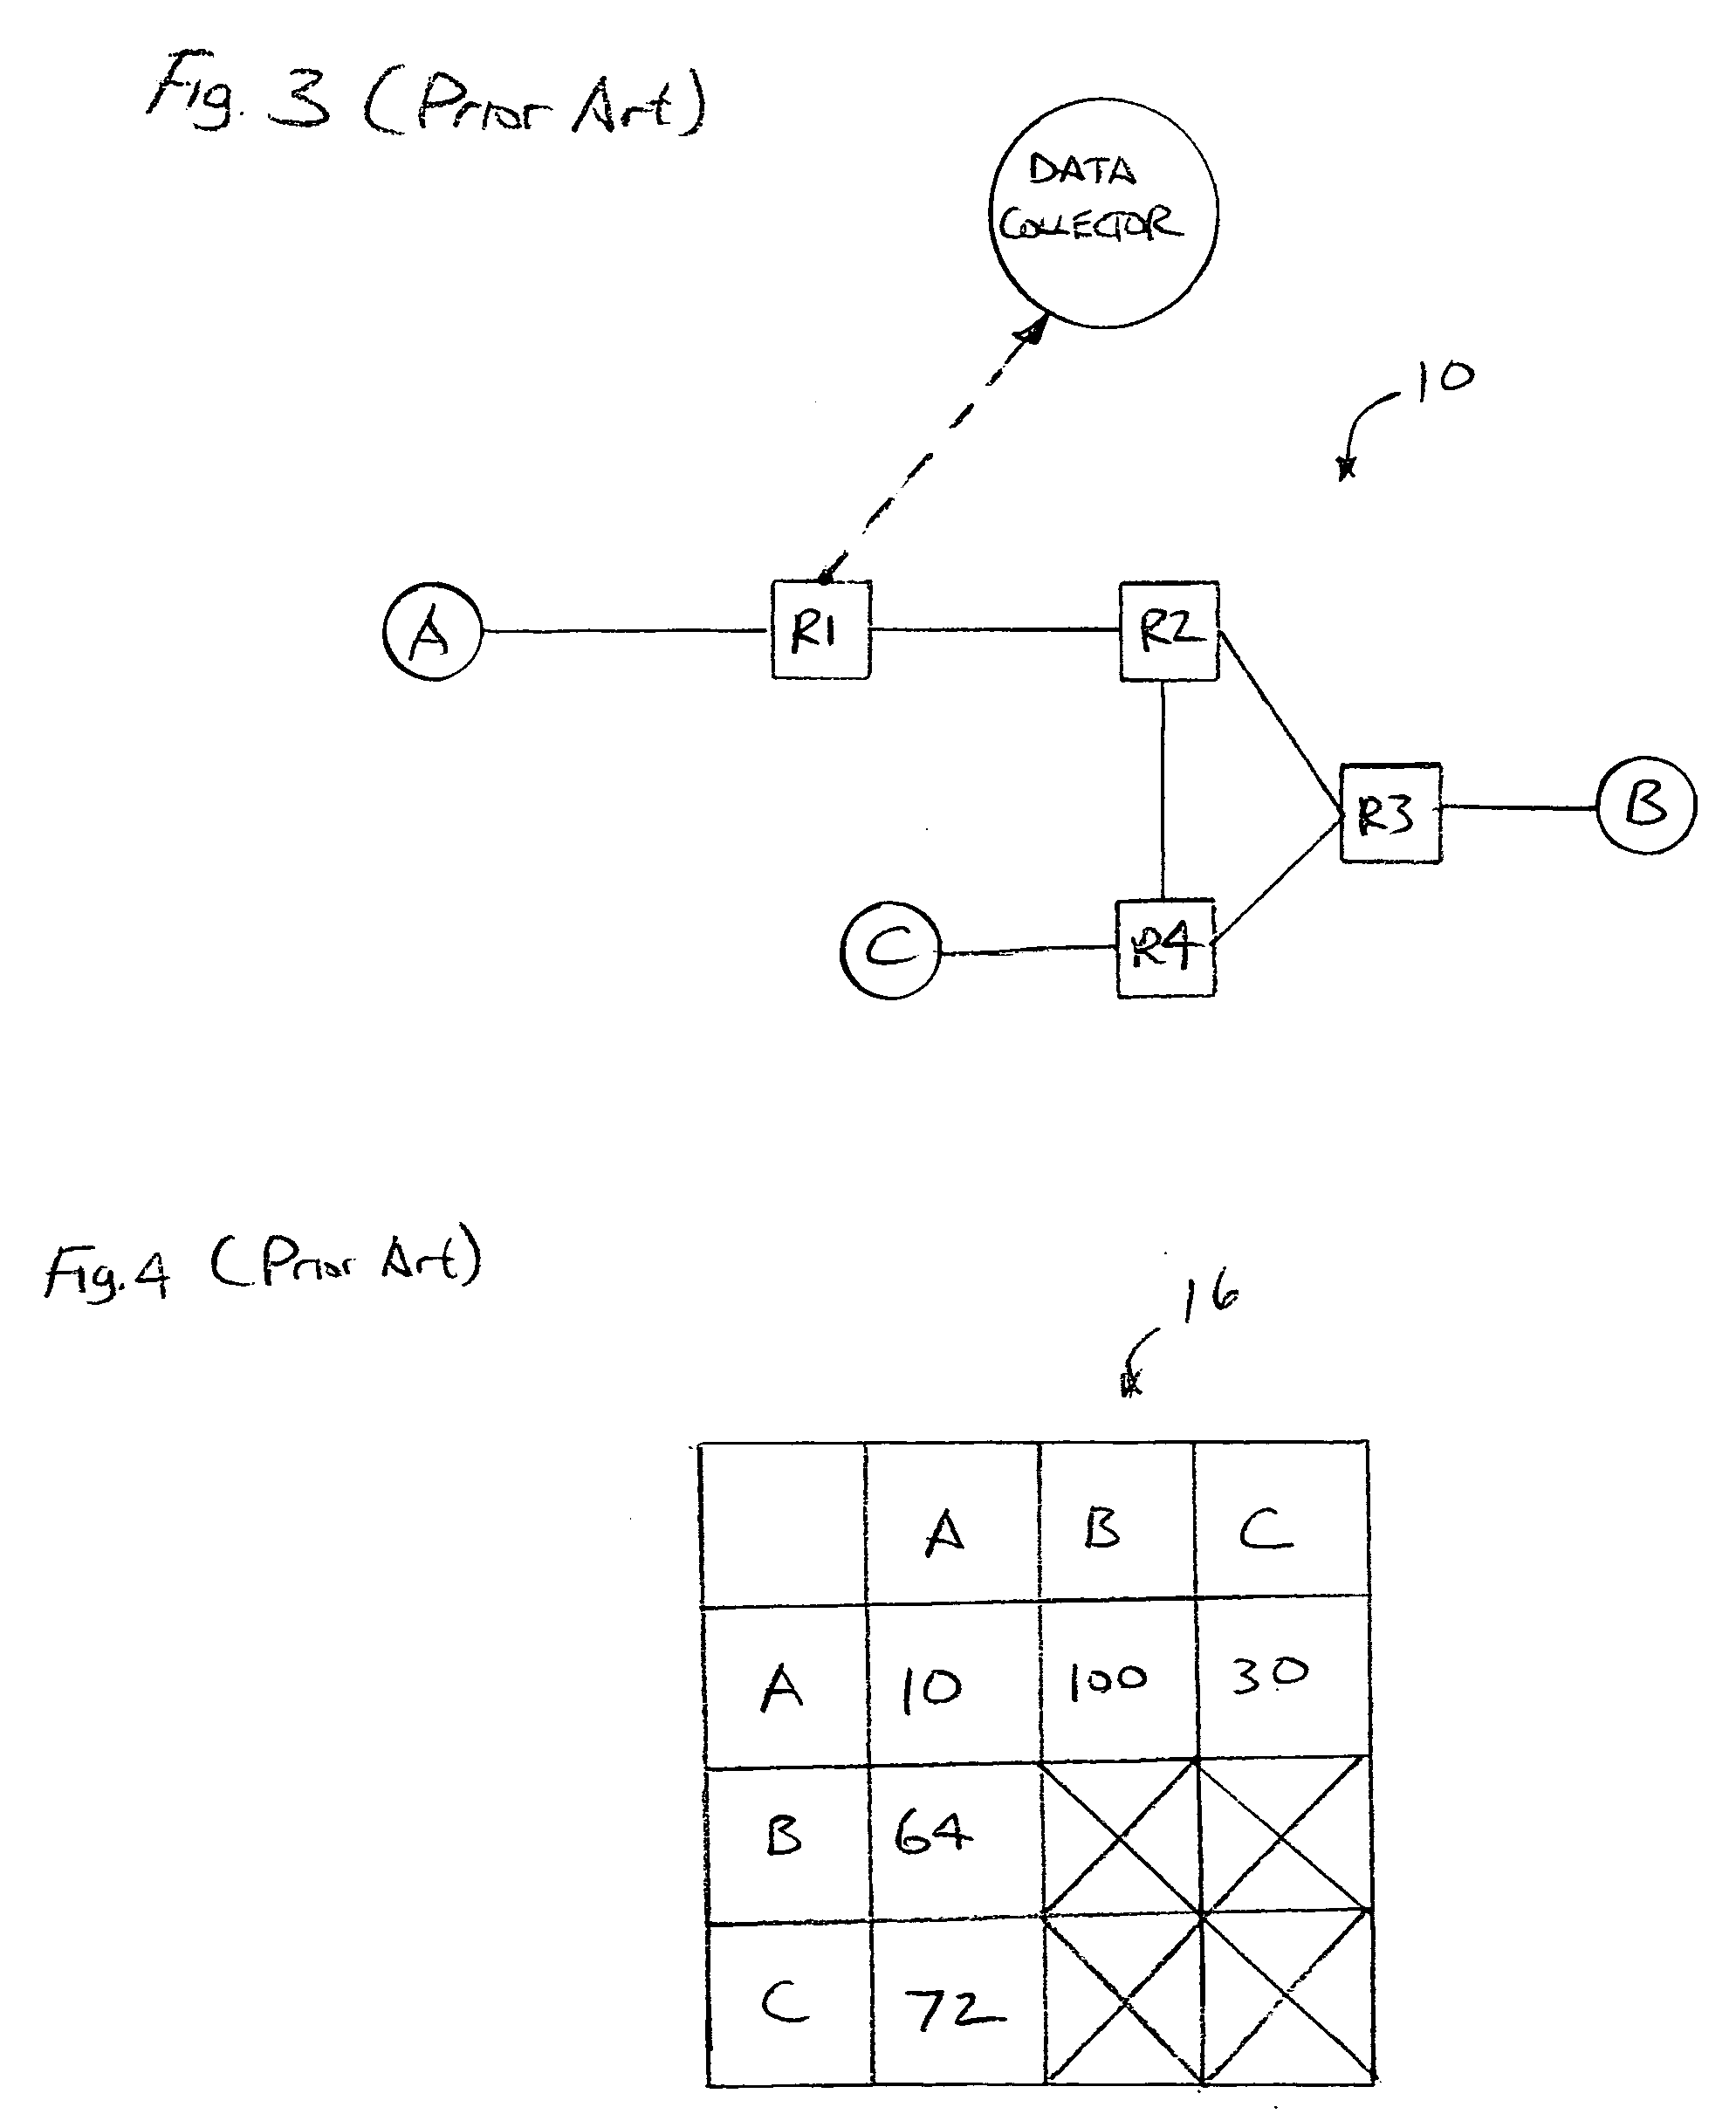 Methods and computer programs for generating data traffic matrices